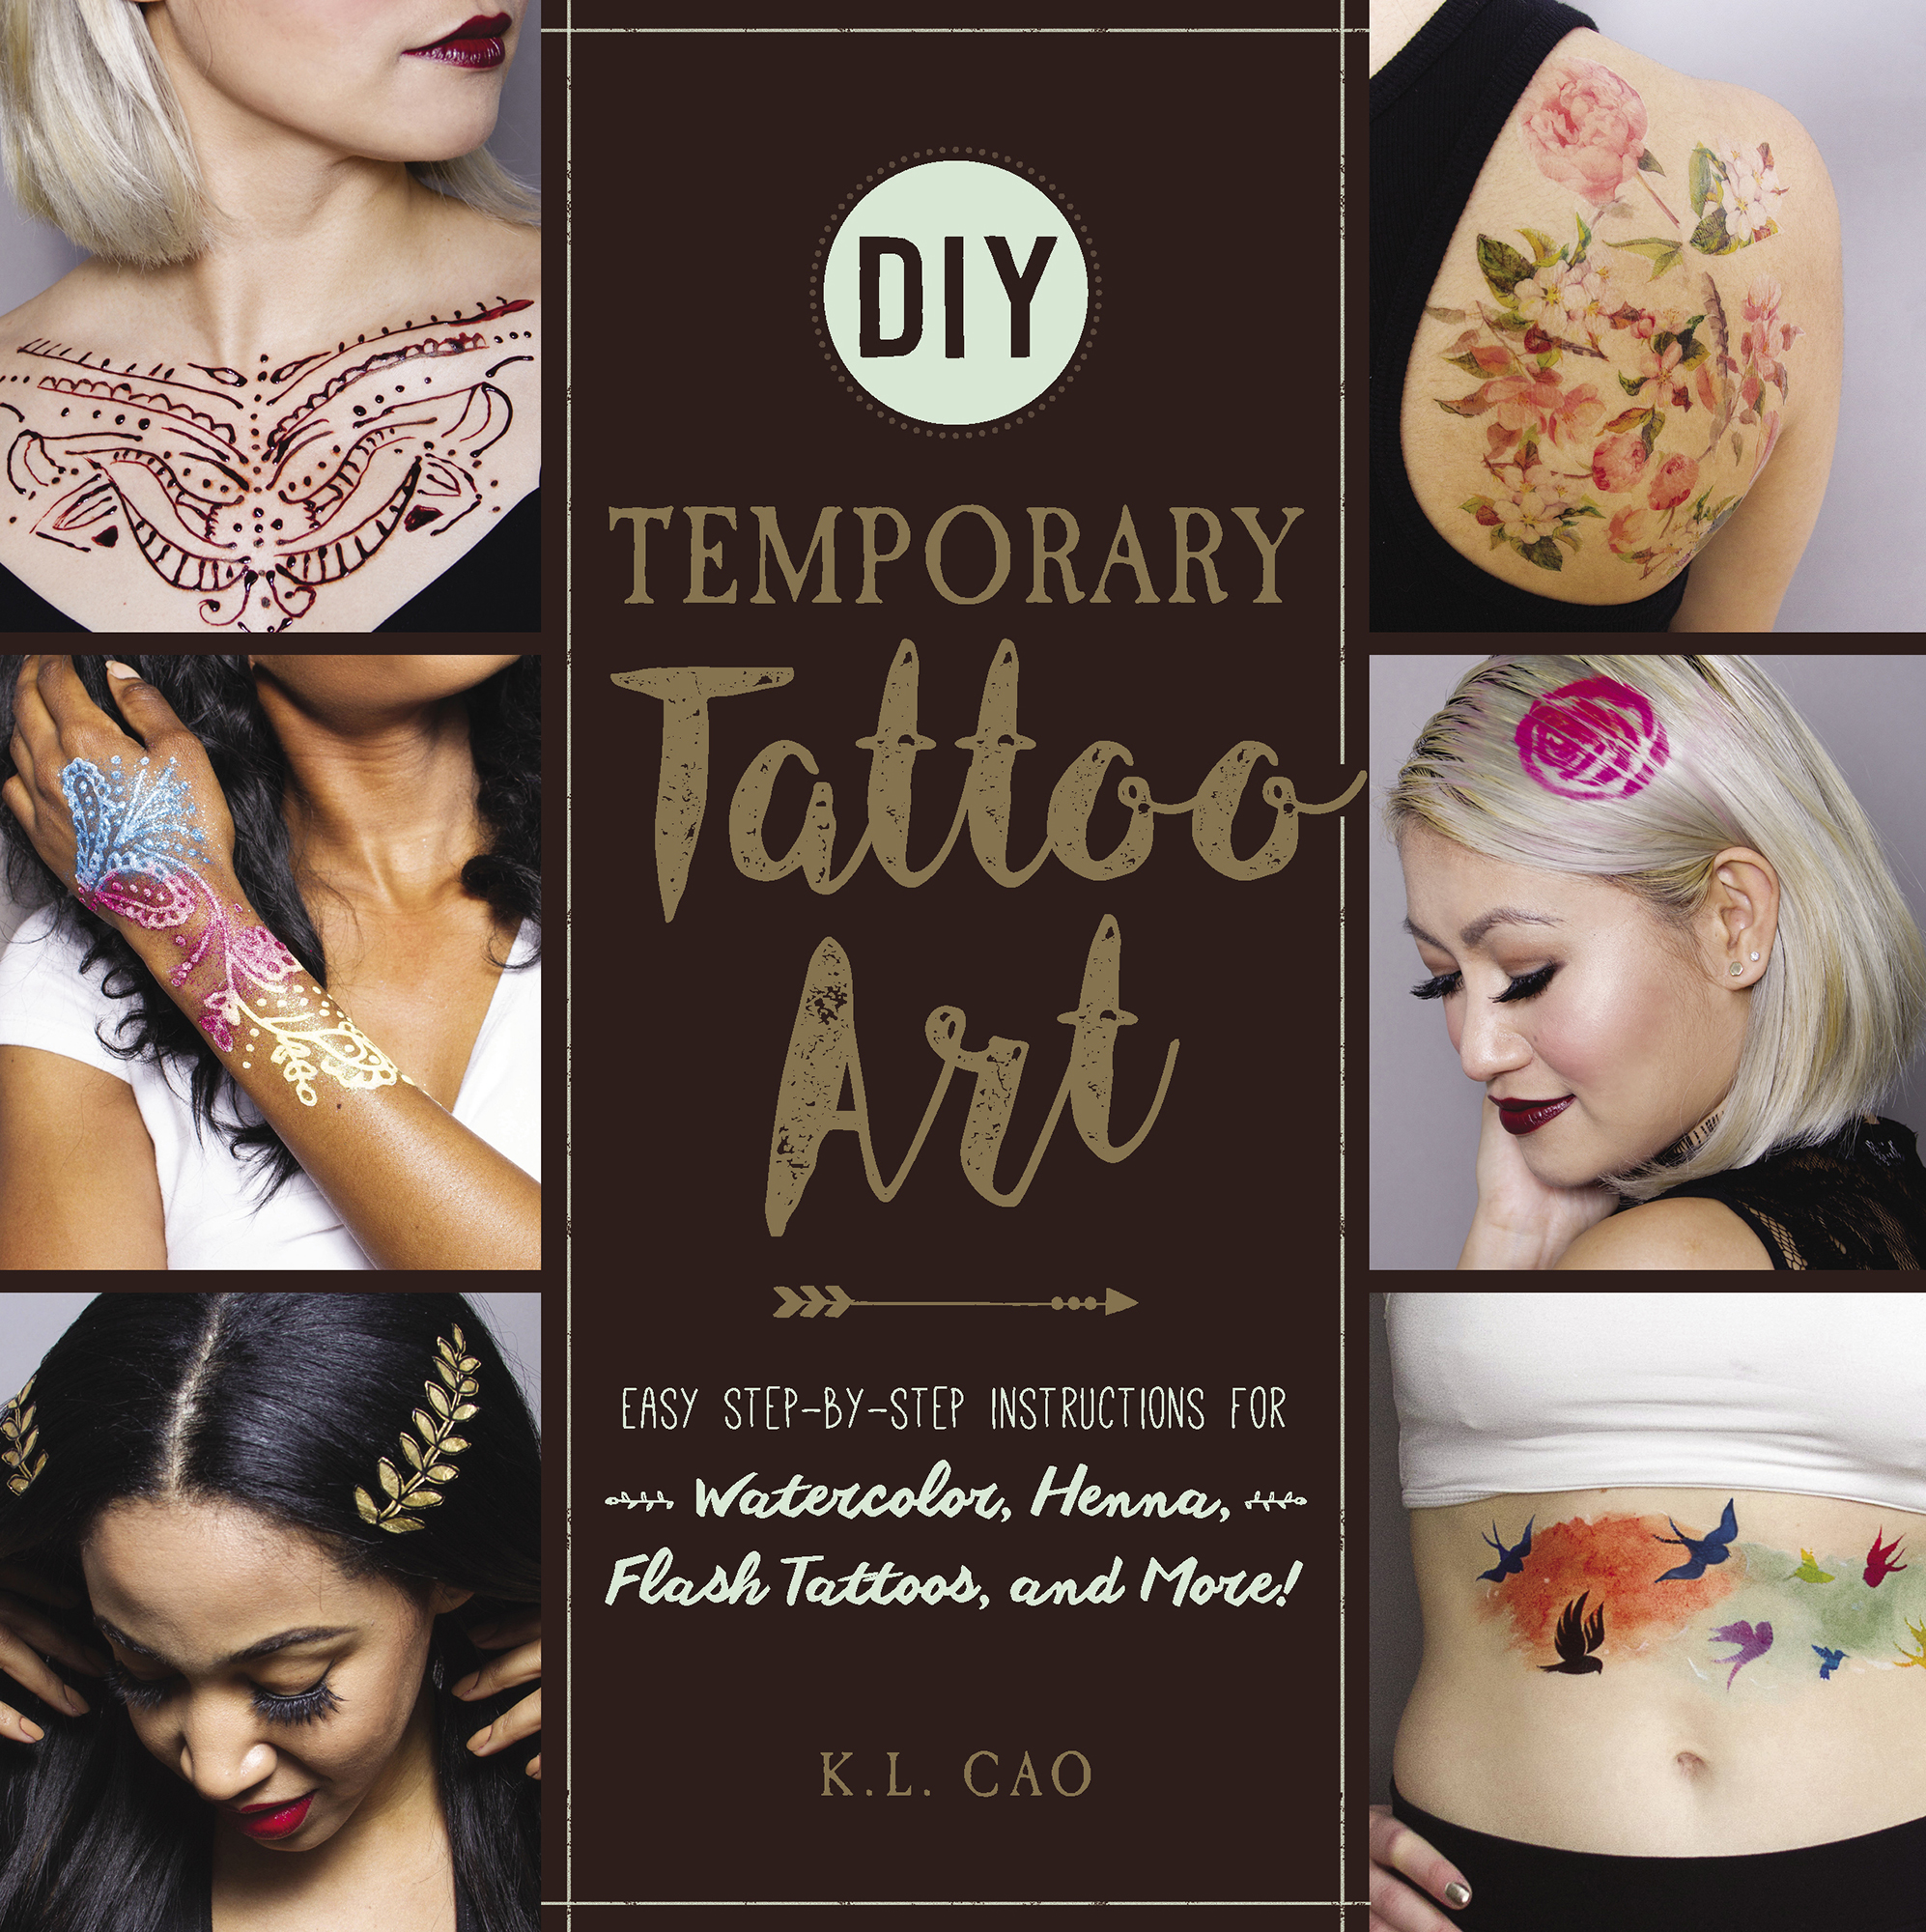 DIY temporary tattoo art easy step-by-step instructions for watercolor henna flash tattoos and more - image 1